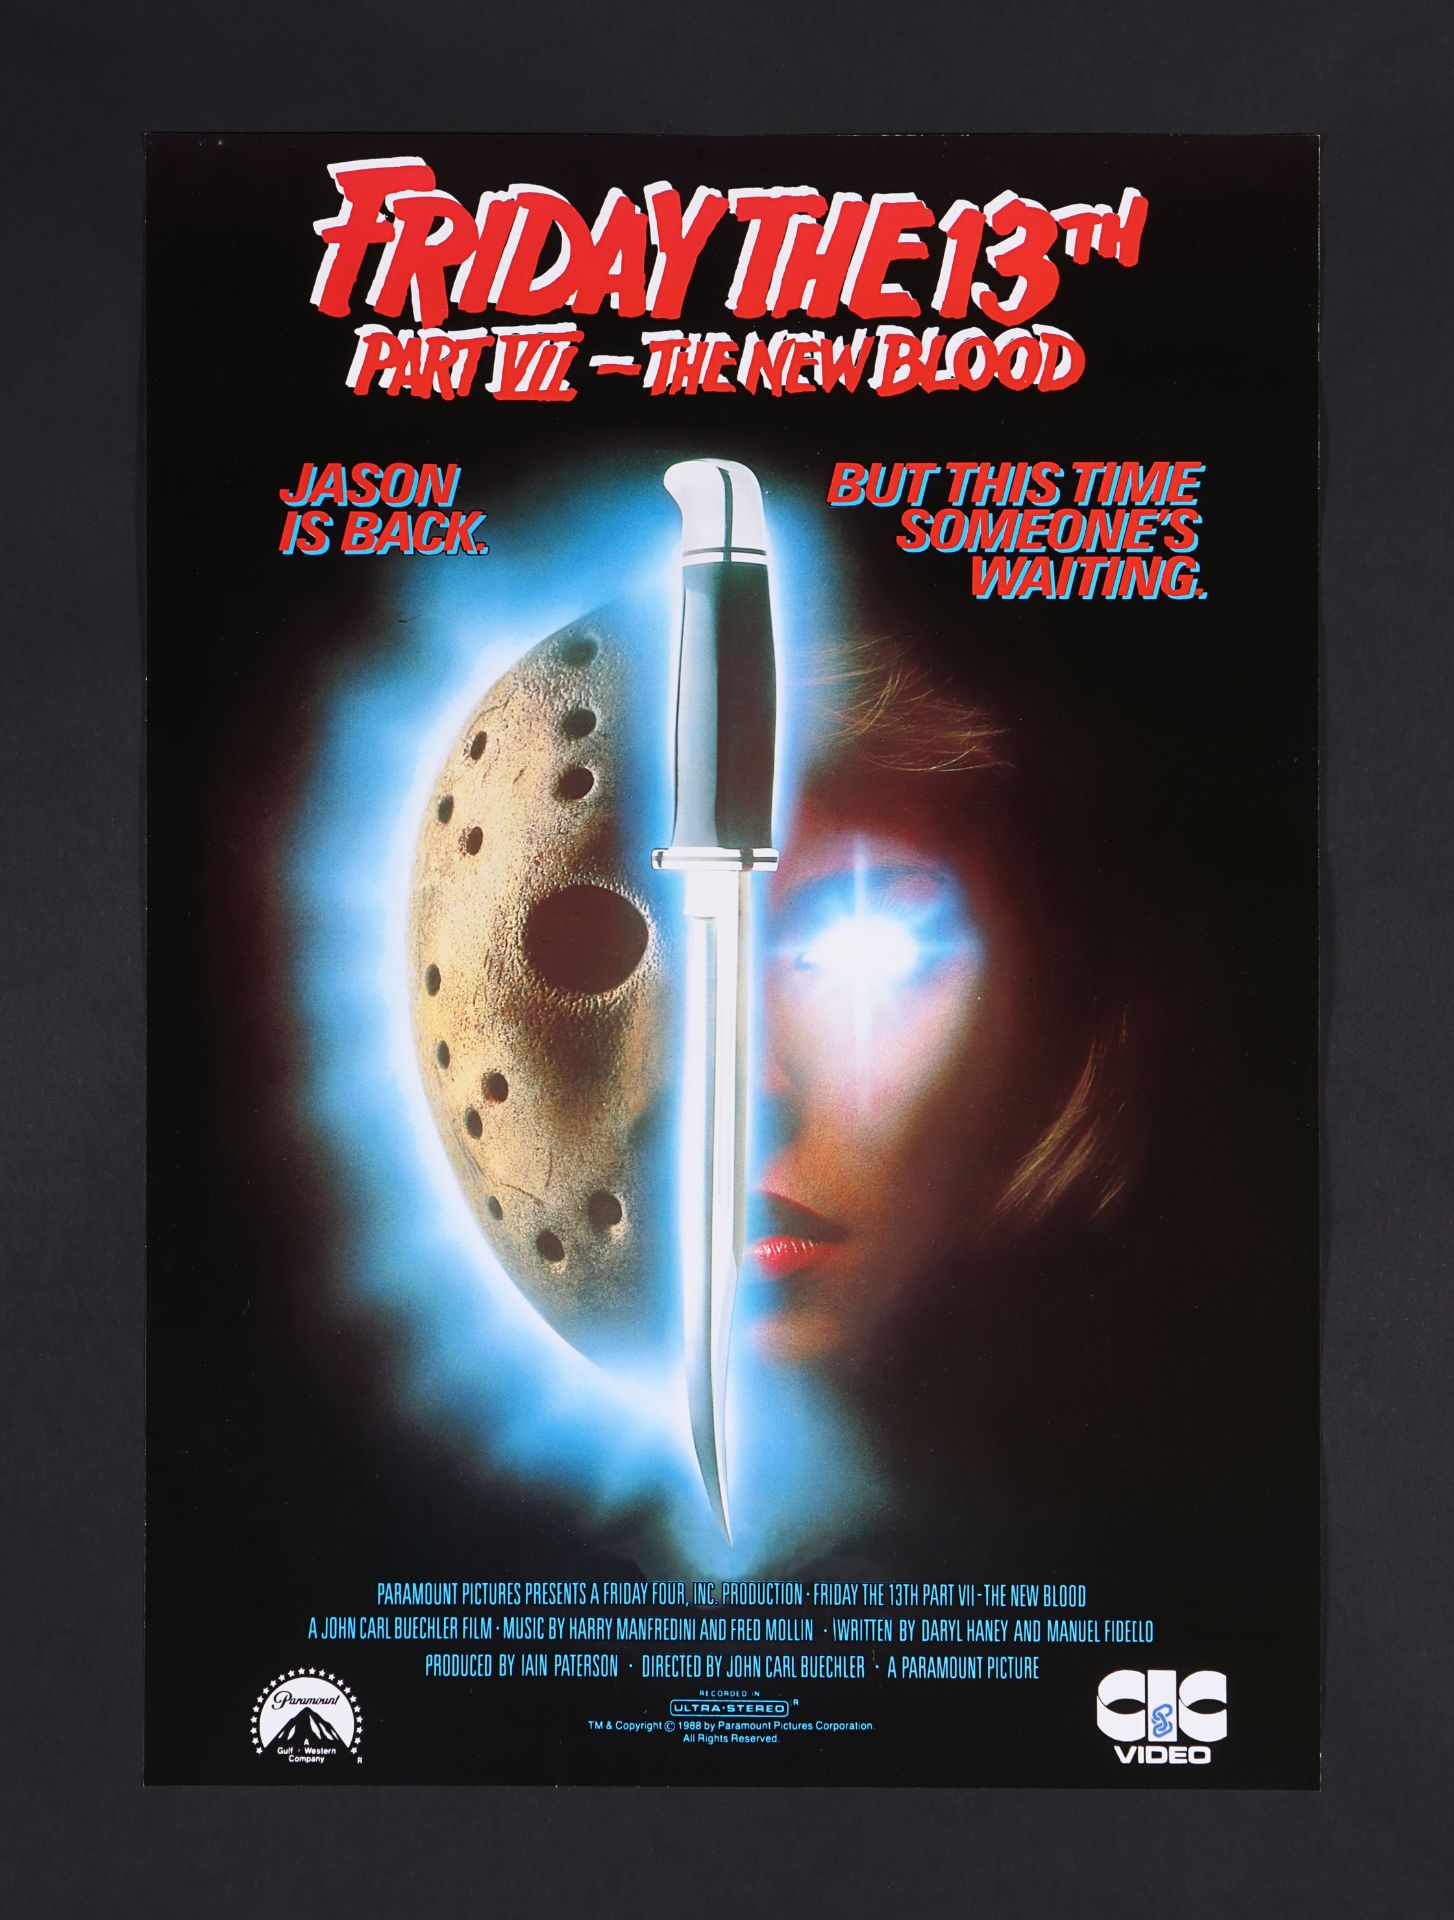 FRIDAY THE 13TH: VARIOUS PRODUCTIONS (1984 - 1989) - Six UK Video Posters, circa 1985 - 1990 - Image 5 of 6